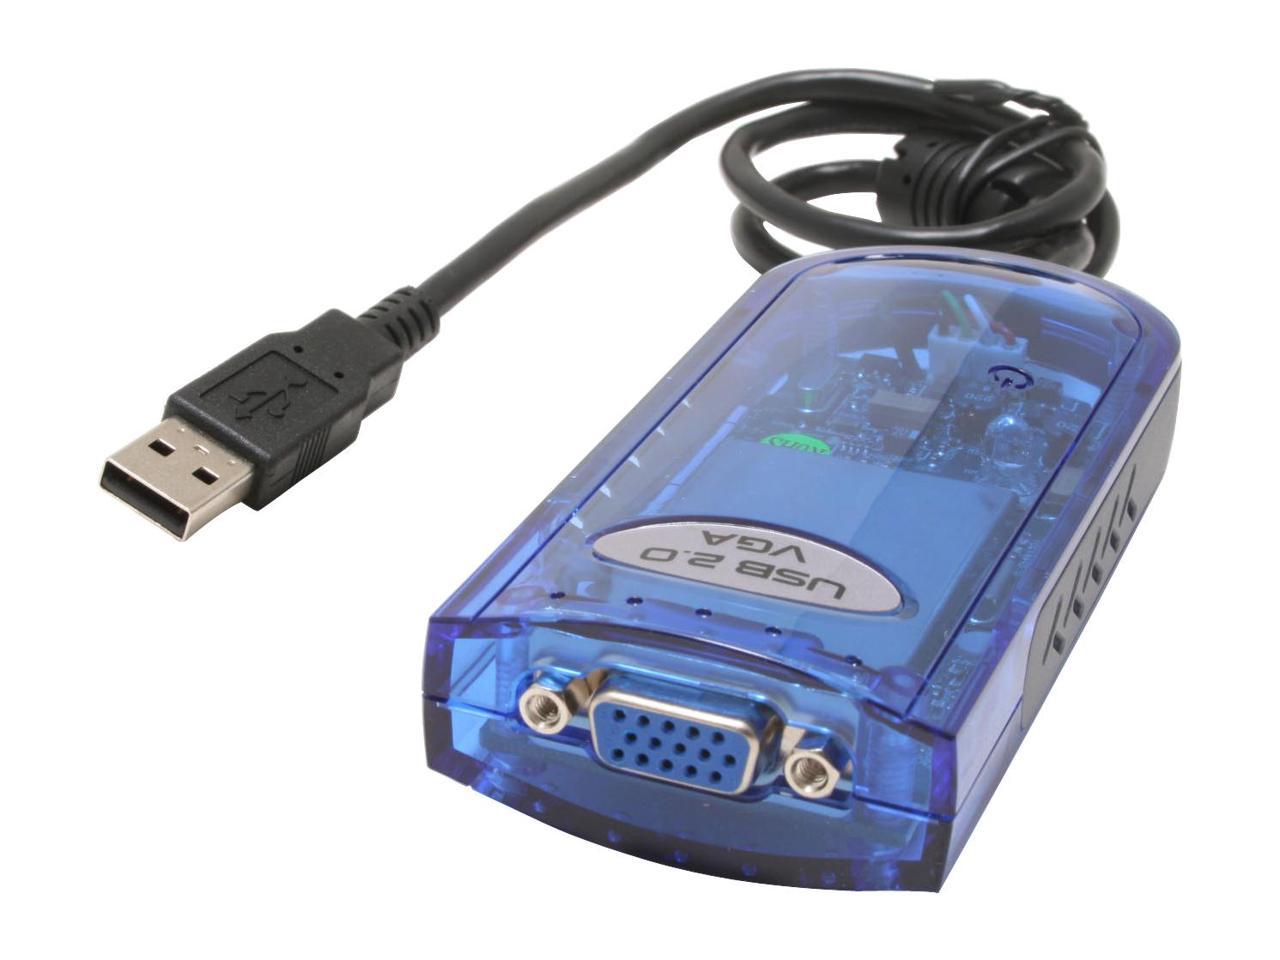 Kinamax high power wireless g usb adapter driver download free